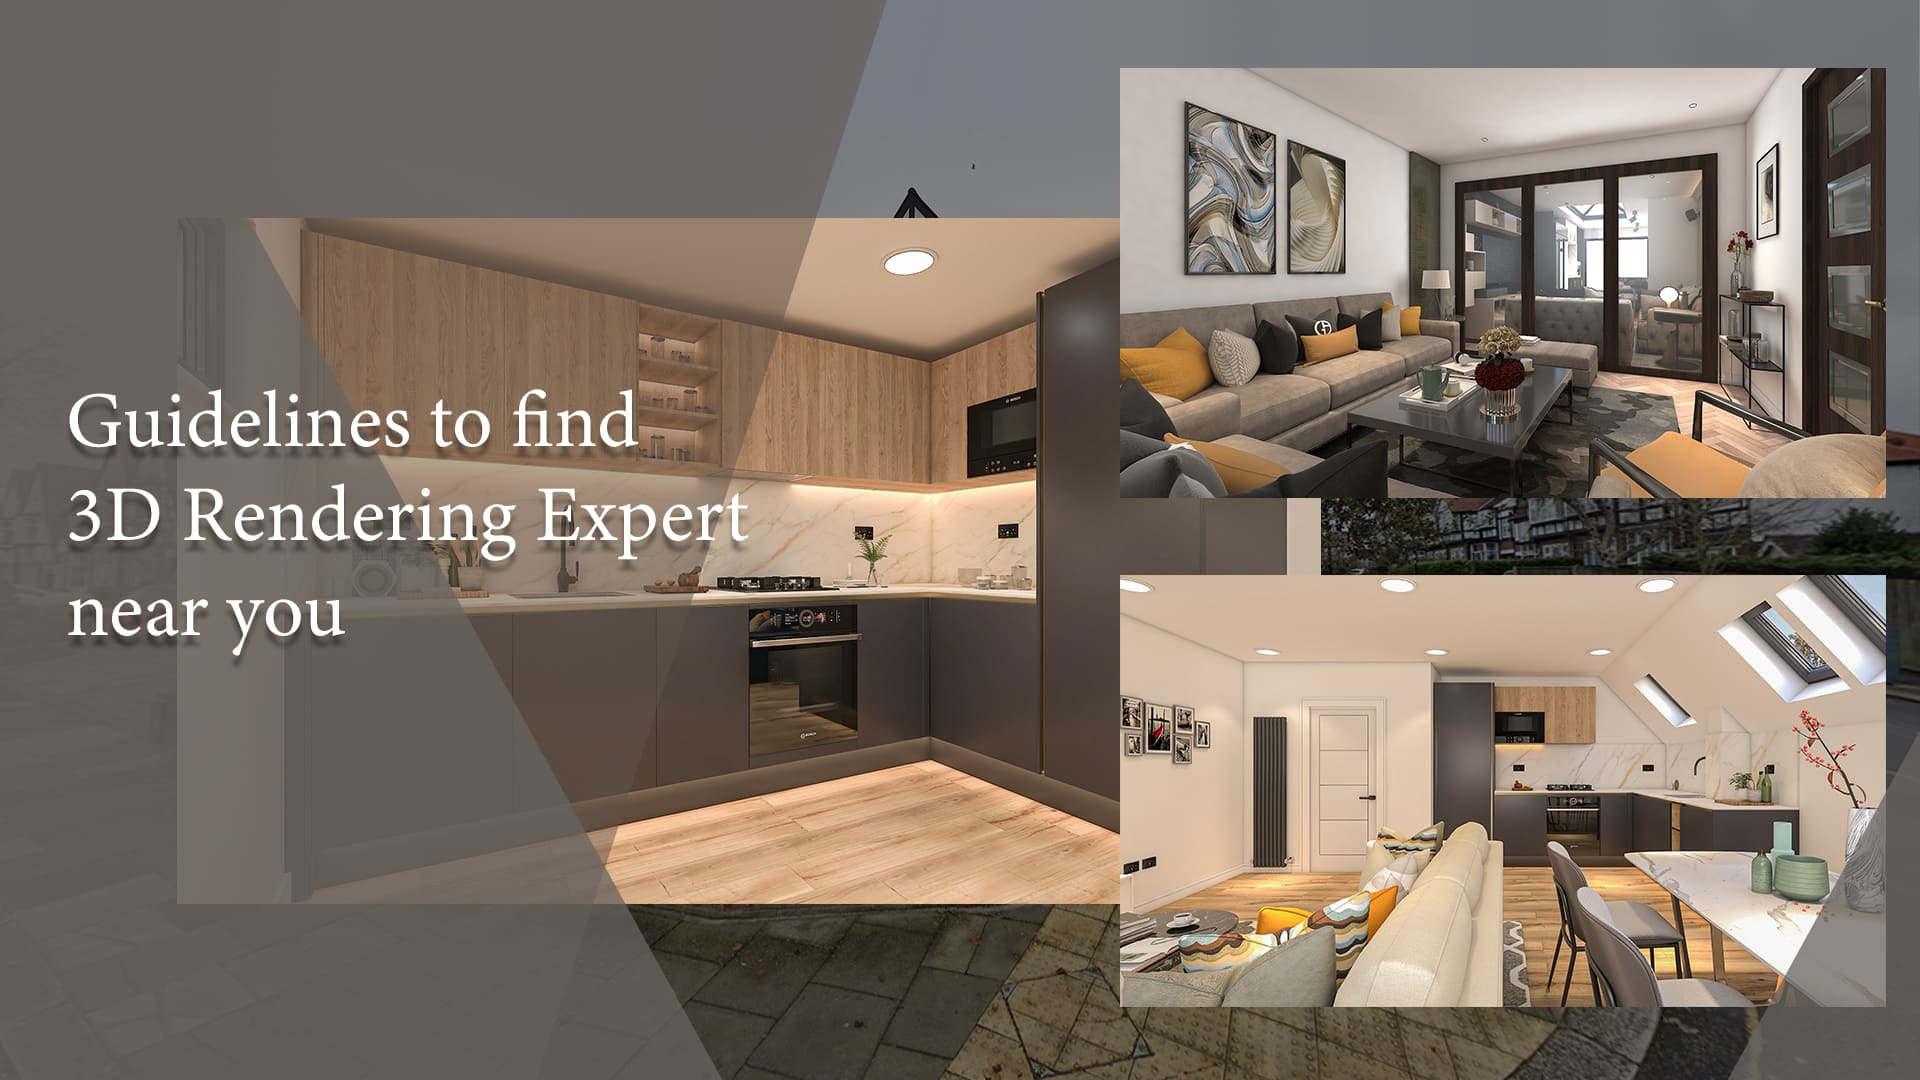 Guidelines to find 3D Rendering Expert near you